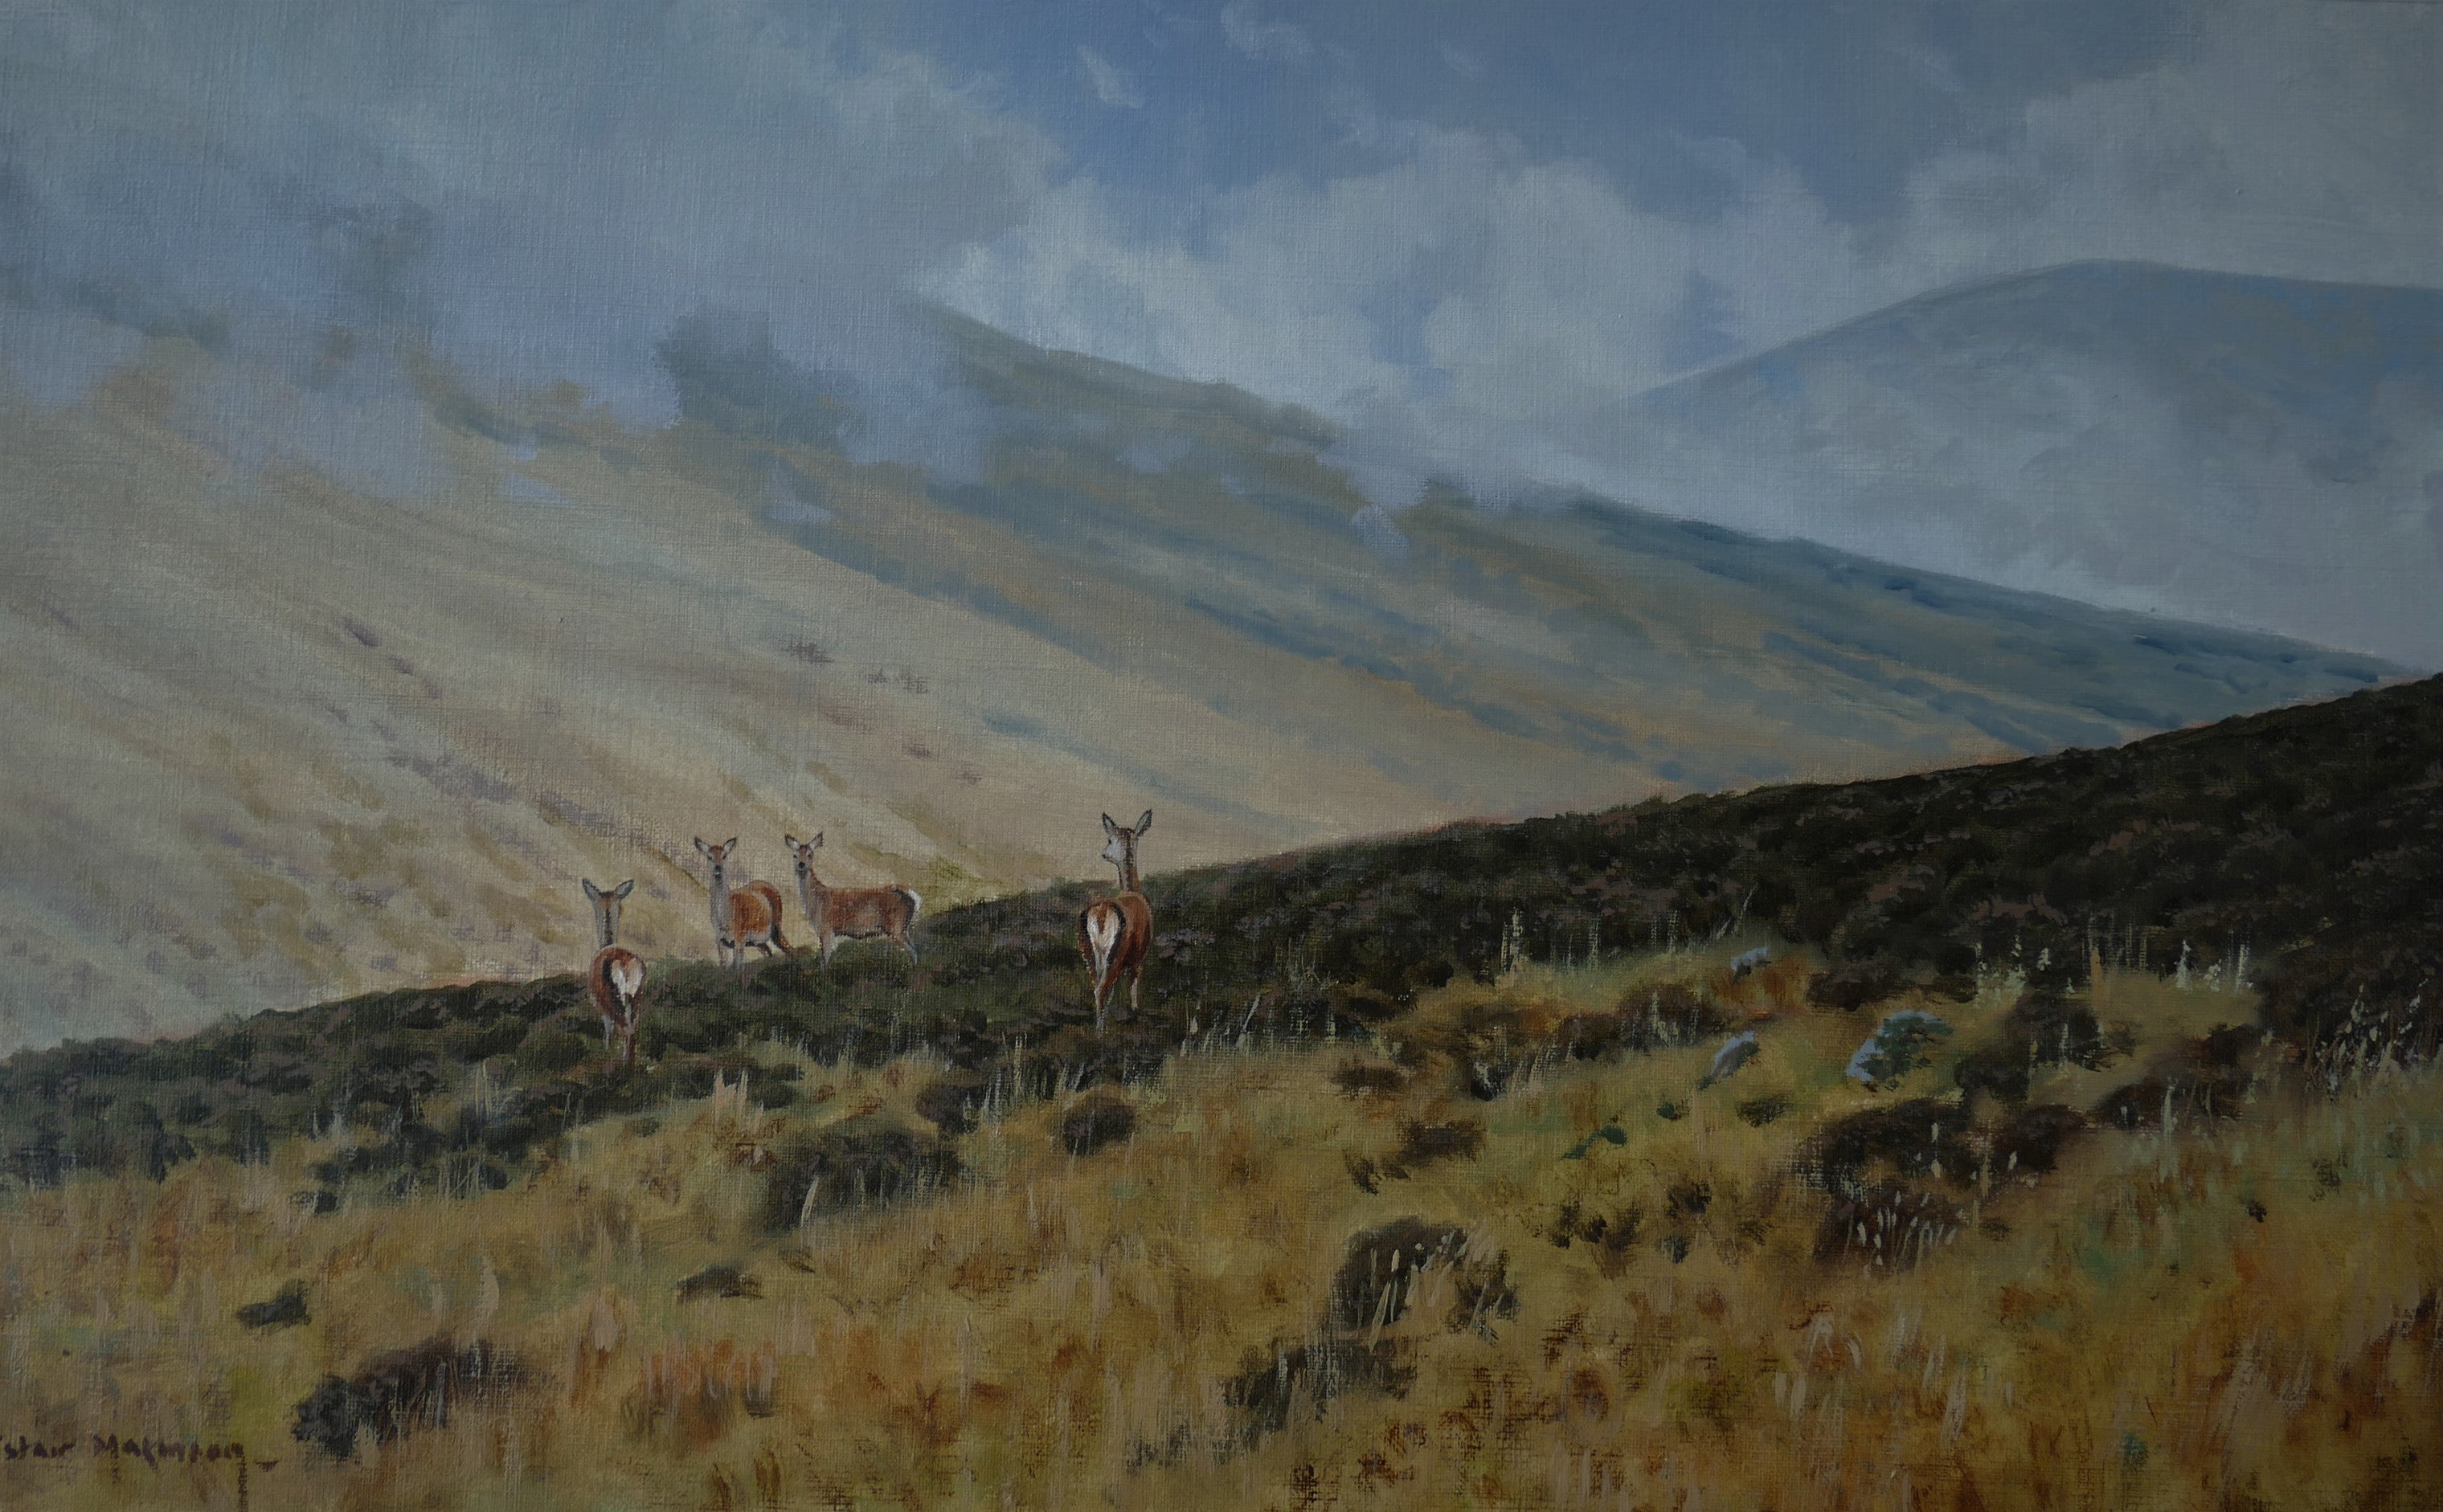 'Wary Hinds' - Original Oil Painting by Alistair Makinson - 31 x 50cm